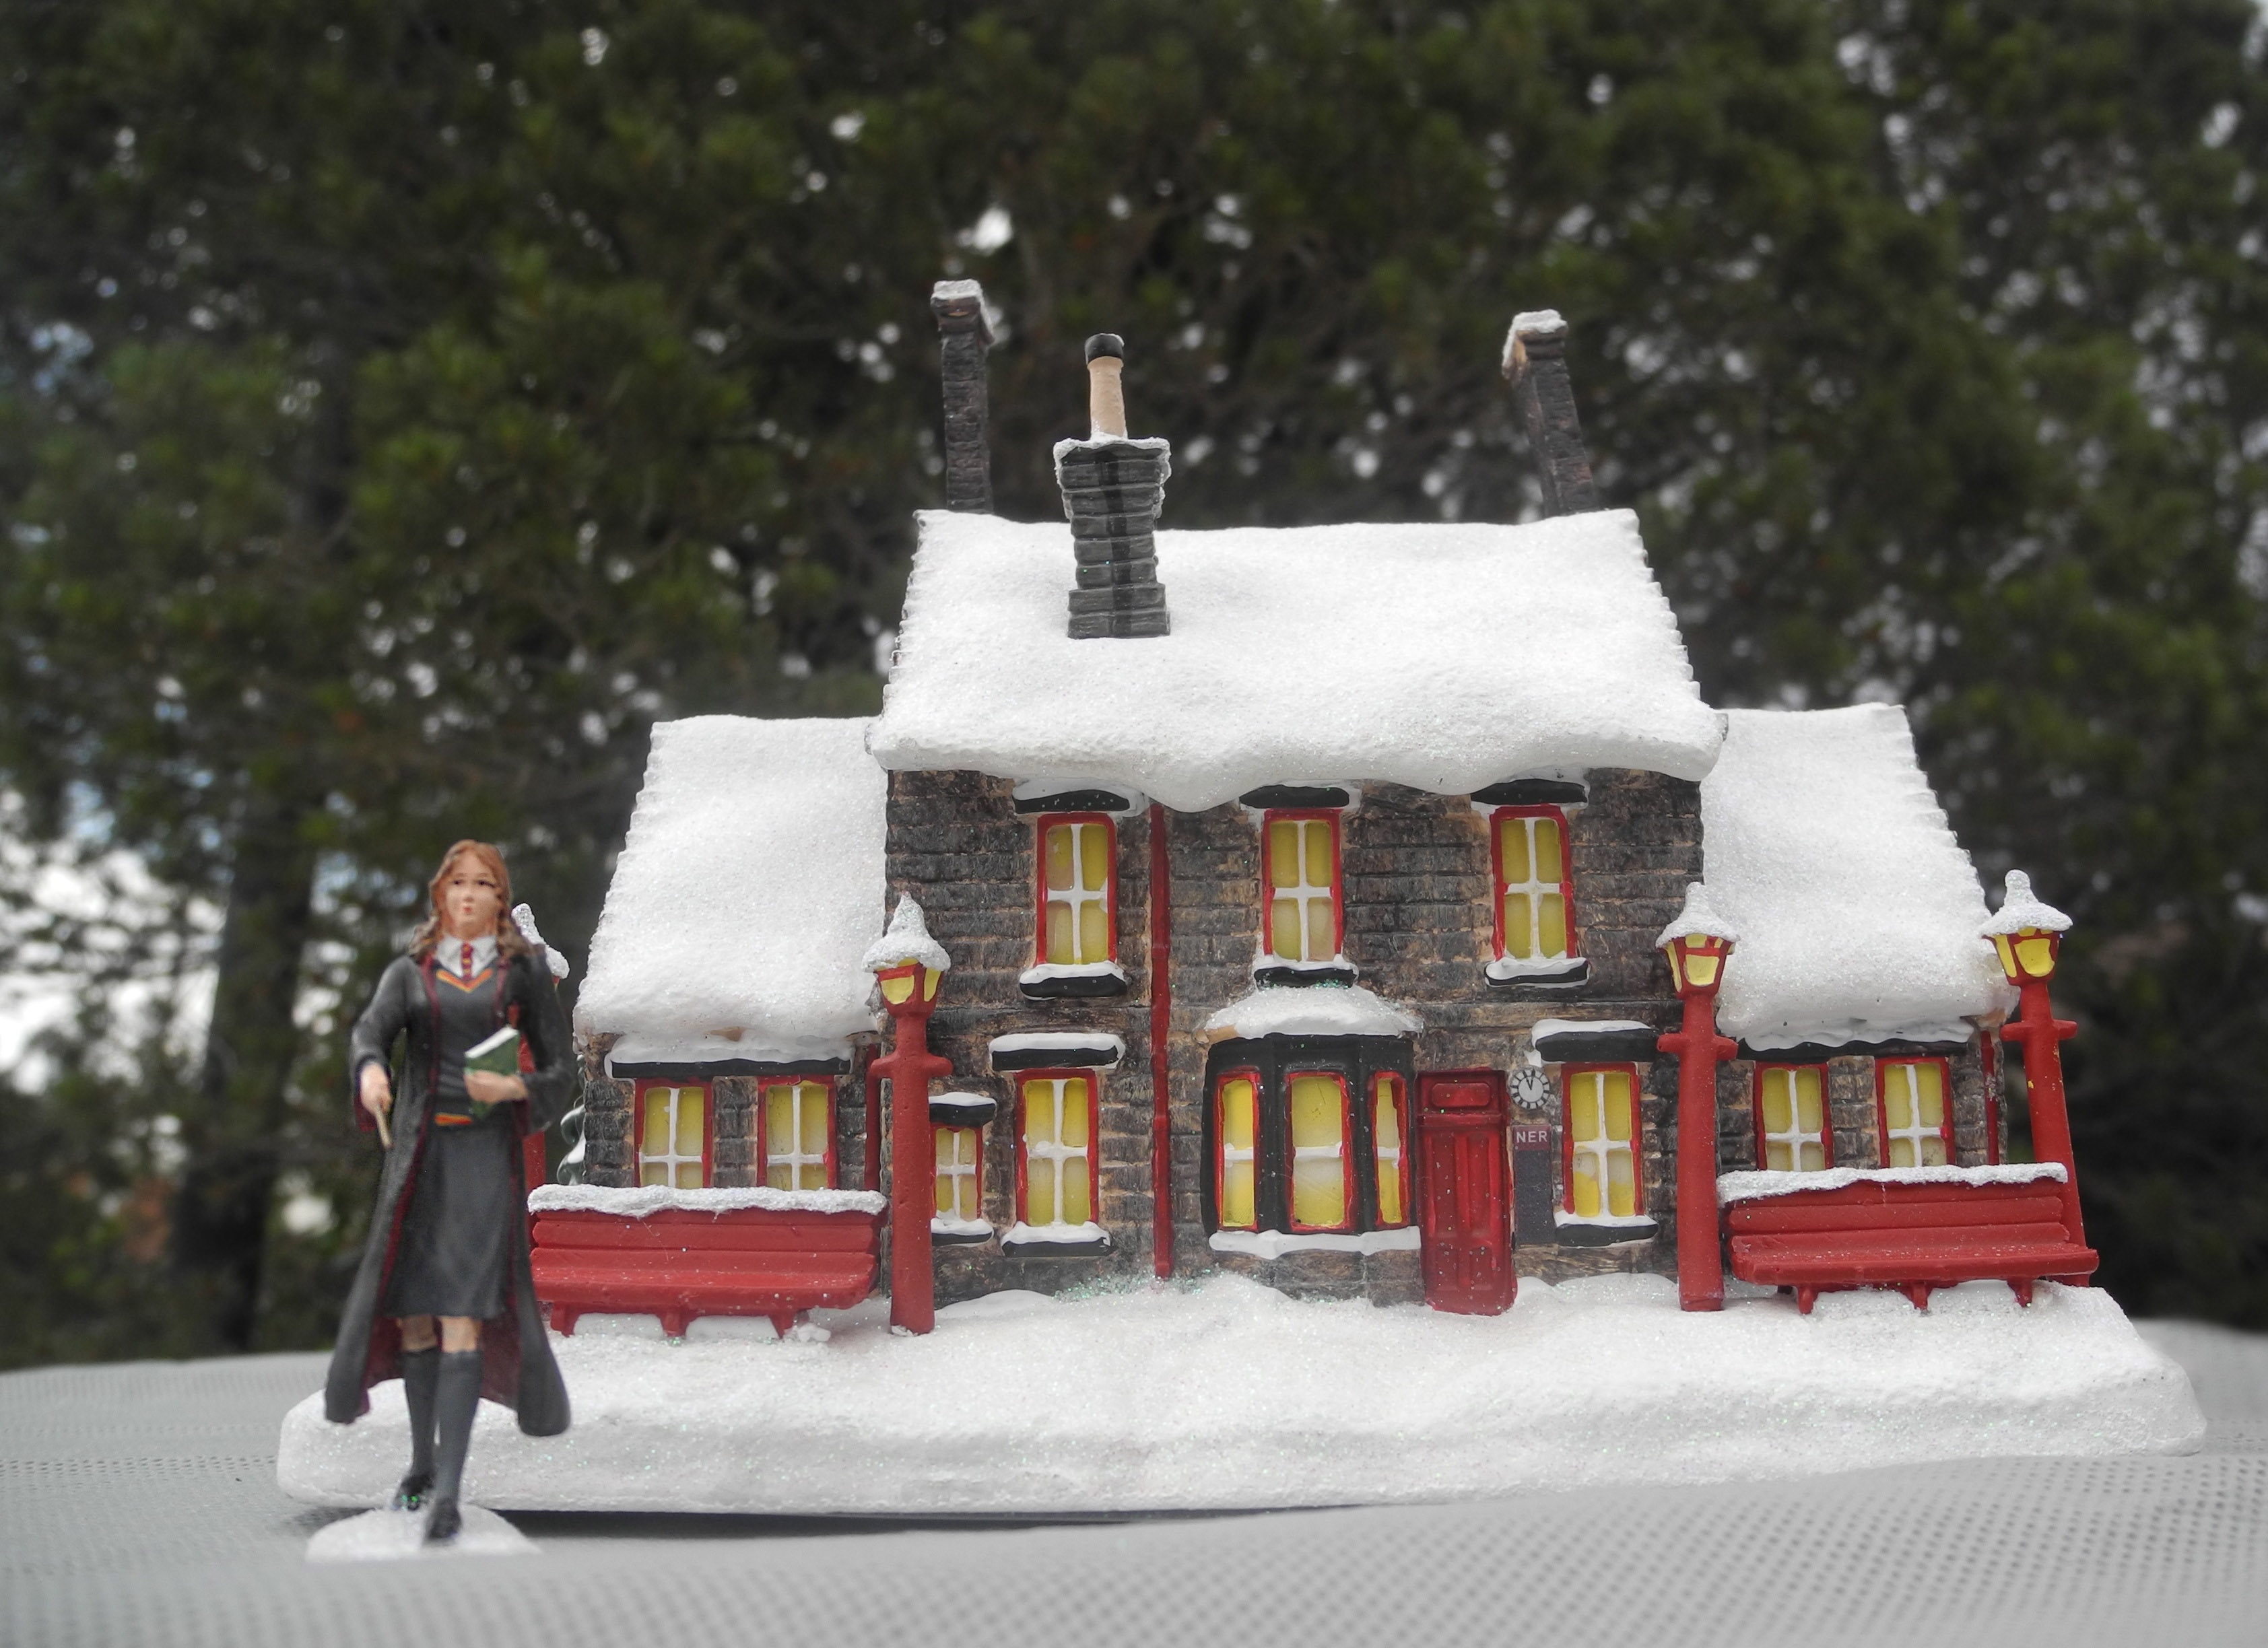 The Bradford Exchange’s “HOGWARTS TRAIN STATION™” with a free “HERMIONE GRANGER™” figurine transports you to a wintry day in Hogsmeade.